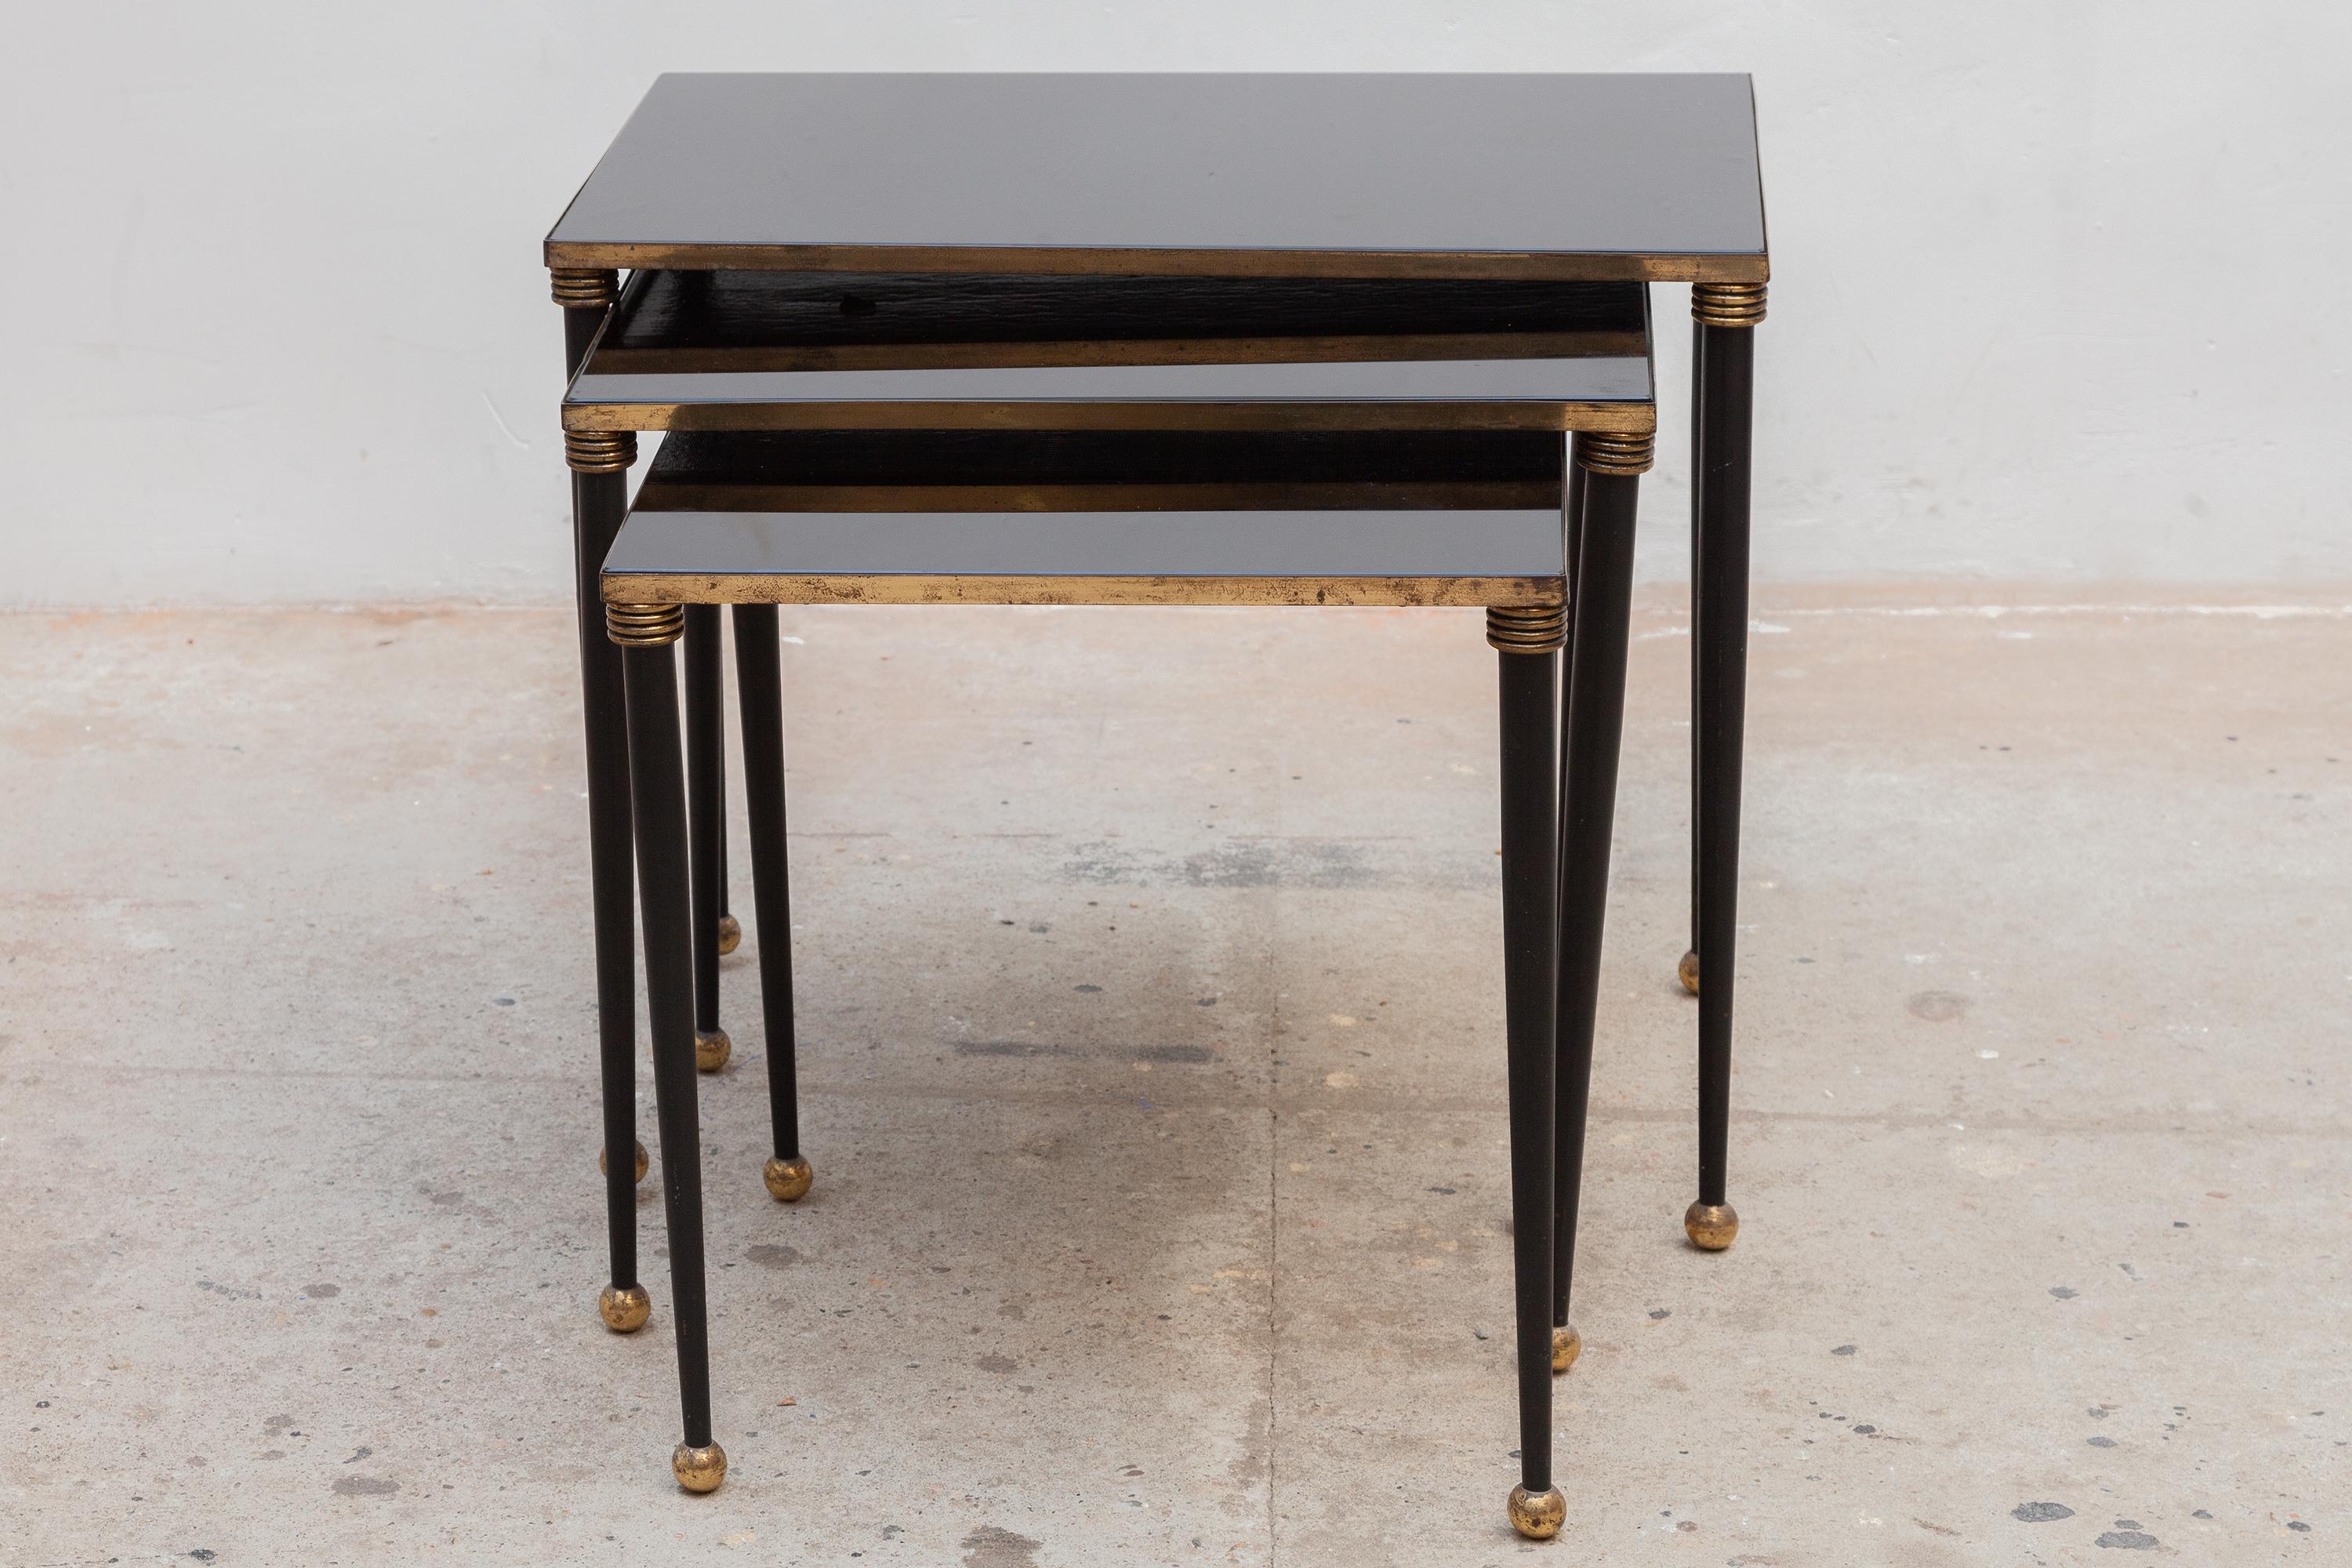 Vintage mid-century Maison Jansen nesting tables a trio with black metal frames with brass accents and black mirror tops, 1950`s ca, French.When stacked together these tables make an interesting geometric pattern.These tables are in good condition.